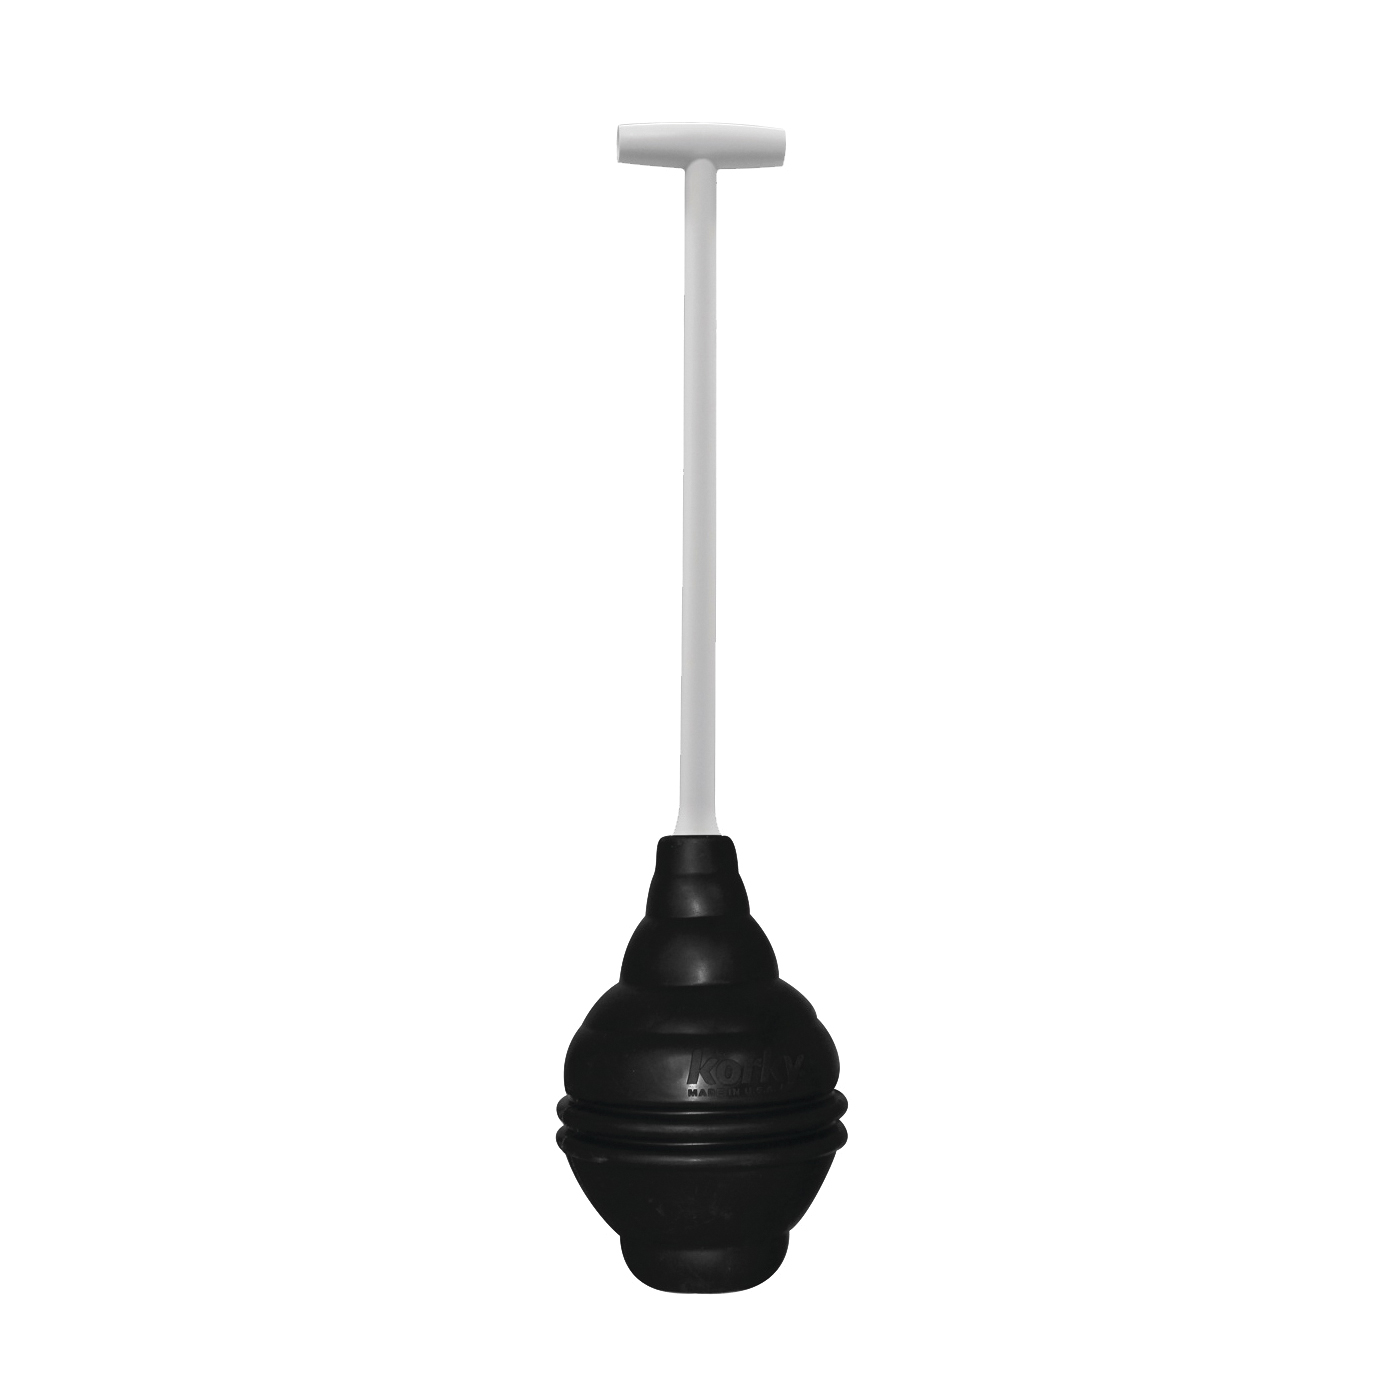 BEEHIVE Max 99-4A Toilet Plunger, 6 in Cup, T-Shaped Handle